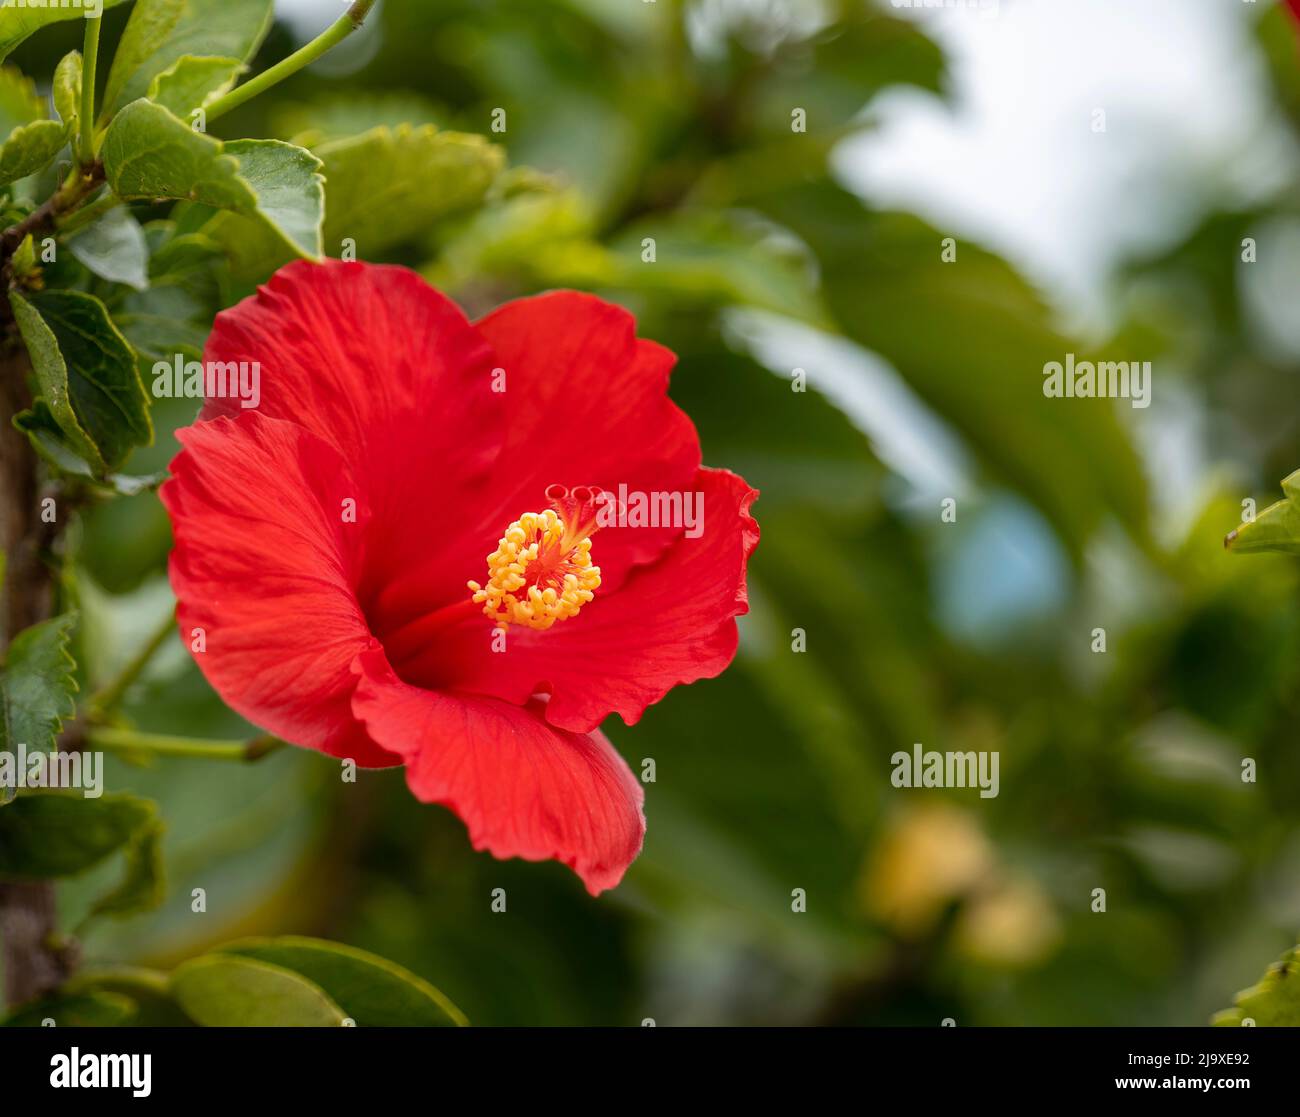 Beautifull red flower blossom on live plant with green leaves. Red Camellia Theaceae bloom with yellow stamen closeup. Stock Photo